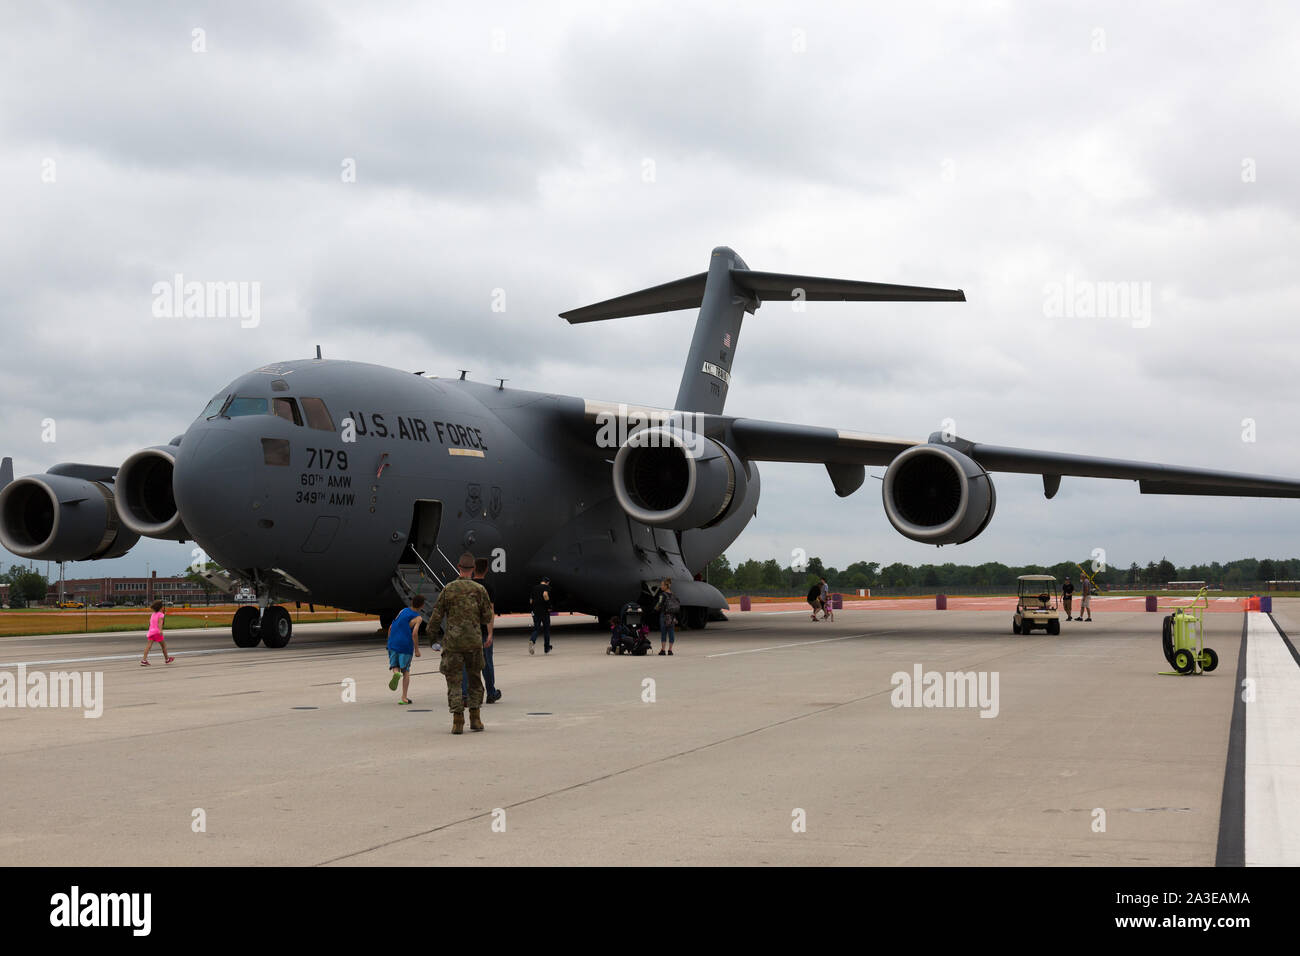 A massive Boeing C-17 Globemaster III cargo plane sits on static display at the Fort Wayne Airshow in Fort Wayne, Indiana, USA. Stock Photo